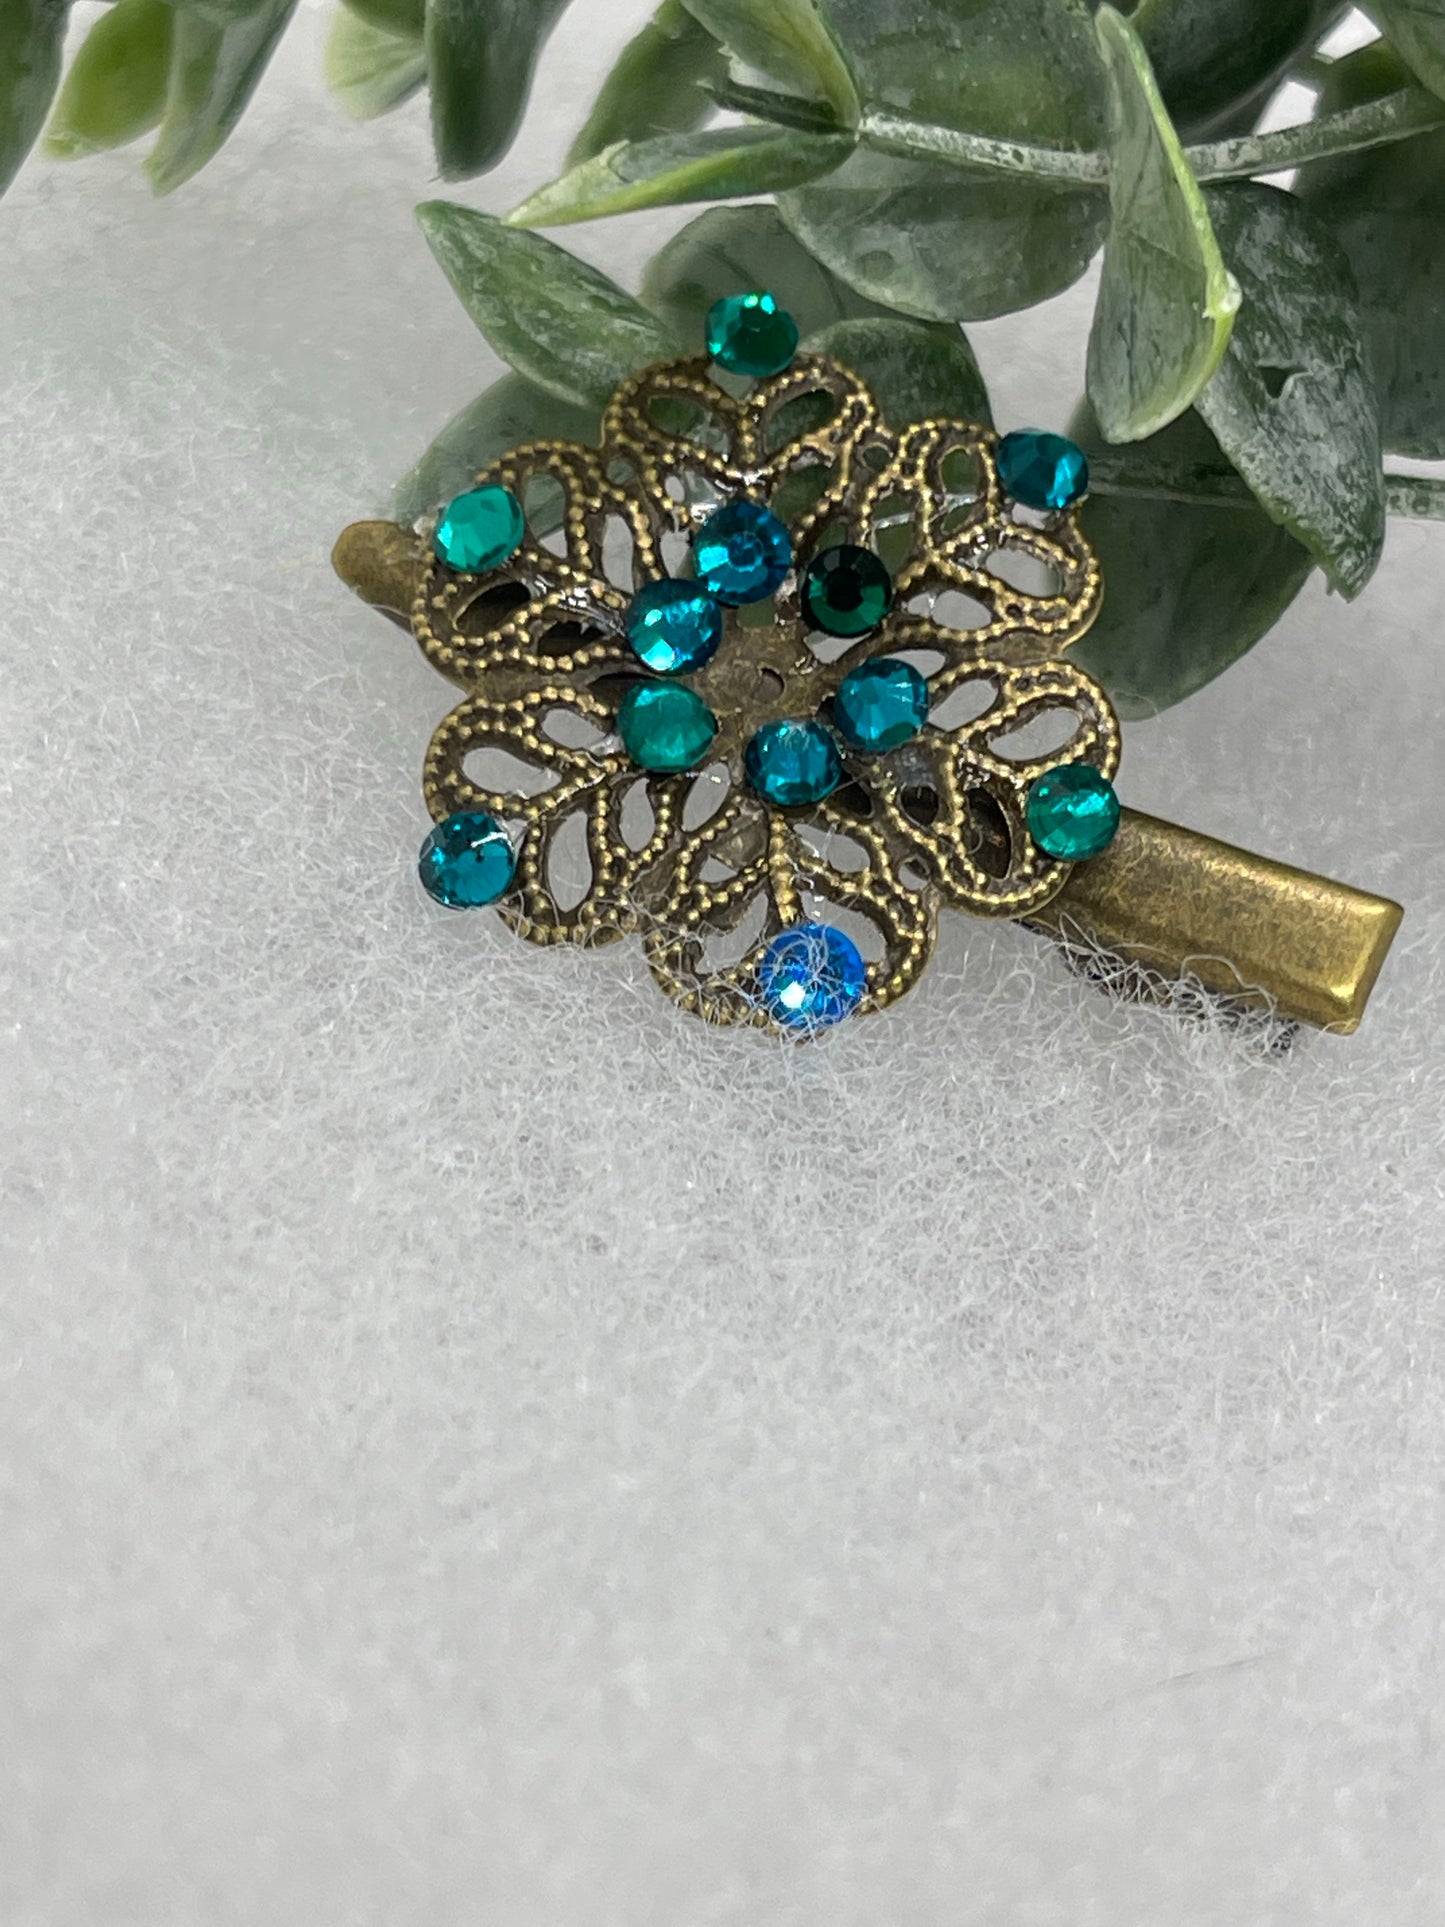 Teal blue Crystal vintage antique style flower hair alligator clip approximately 2.0” long Handmade hair accessory bridal wedding Retro